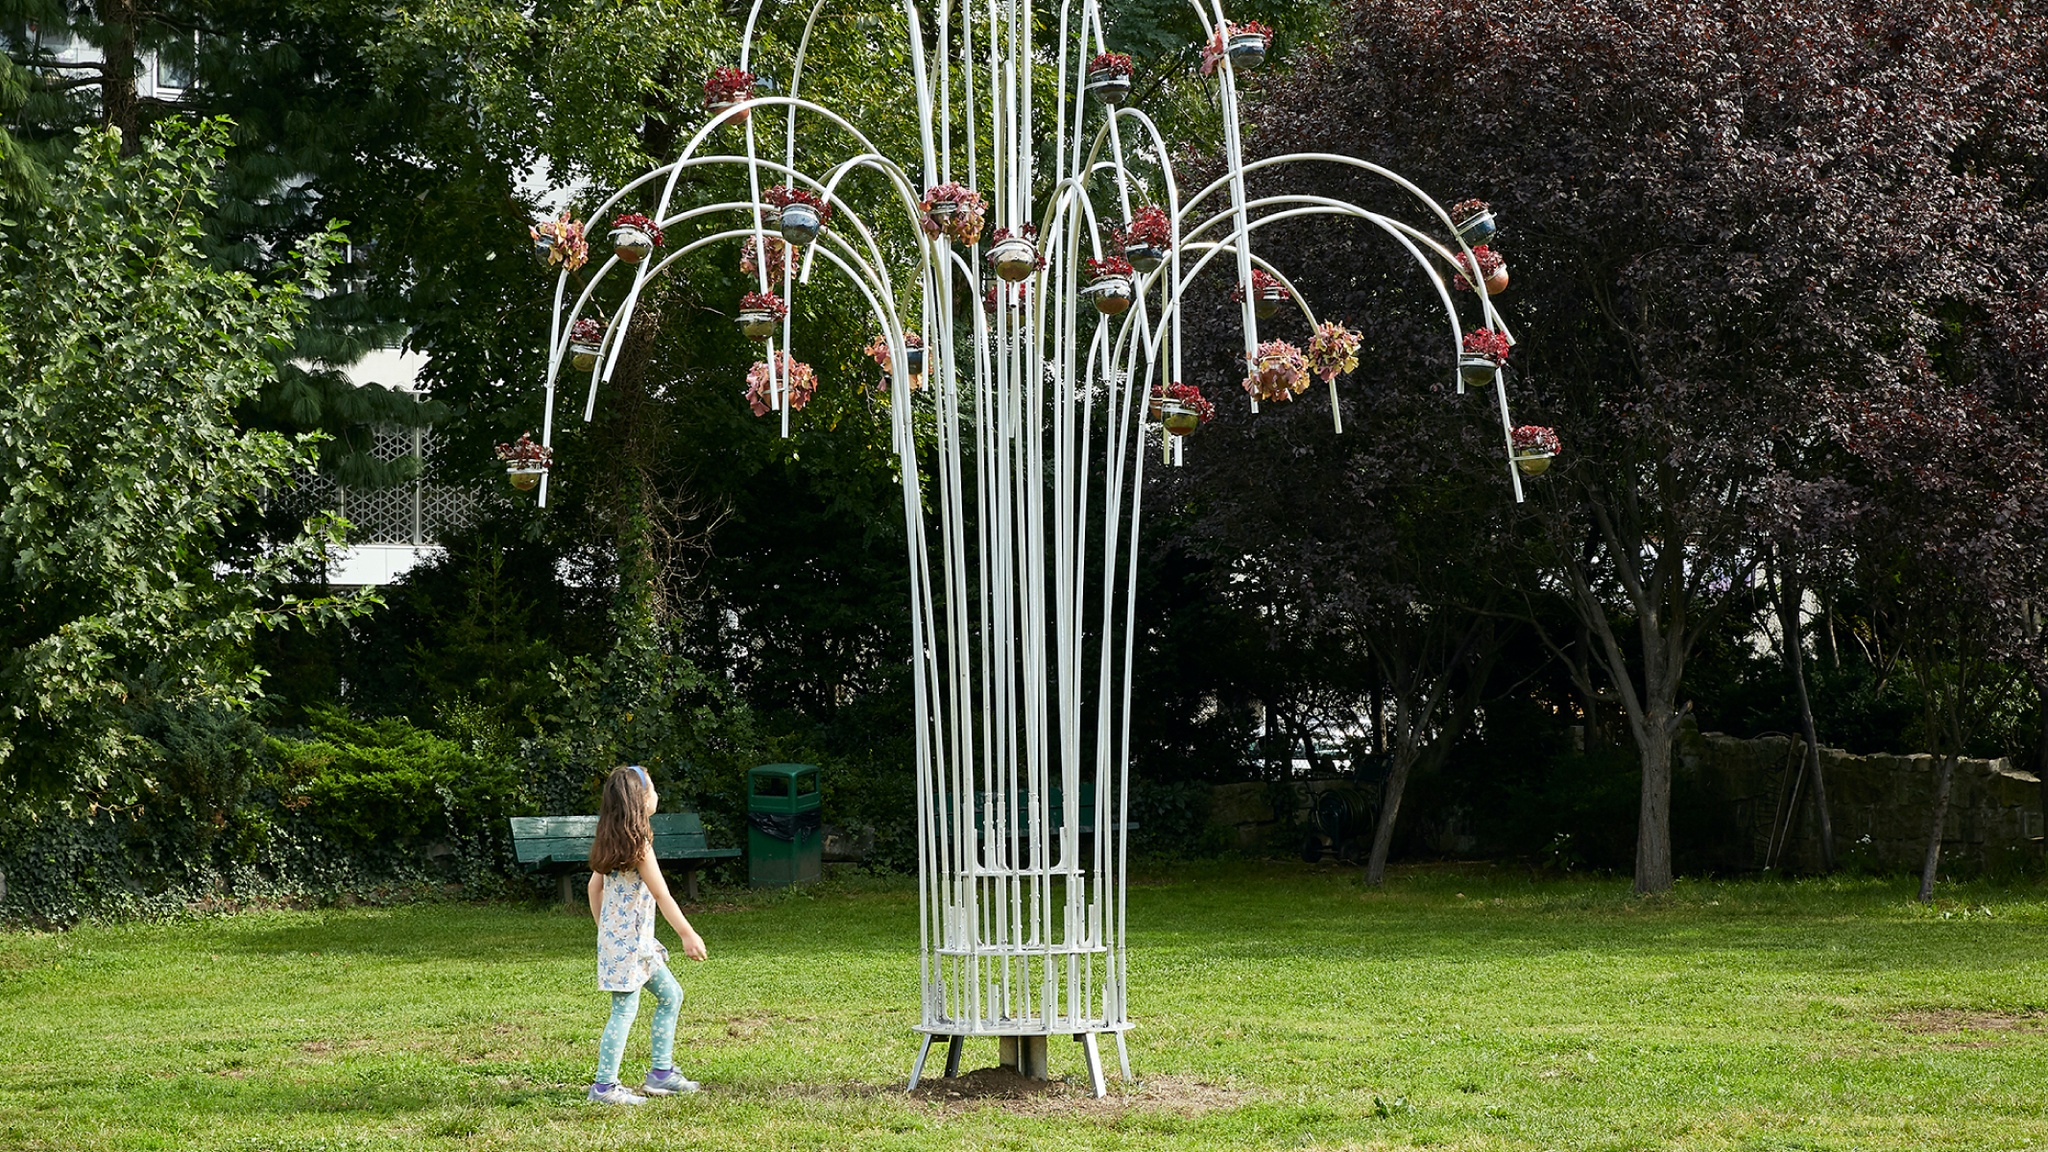 A little girl approaches a sculpture in the middle of a grassy lawn. The sculpture is made of aluminum pipes the stretch upward vertically before bending over slightly at their ends, in the shape of water shooting from a fountain. At the ends of the pipes are coral bell plants held in suspended clayware pots. 